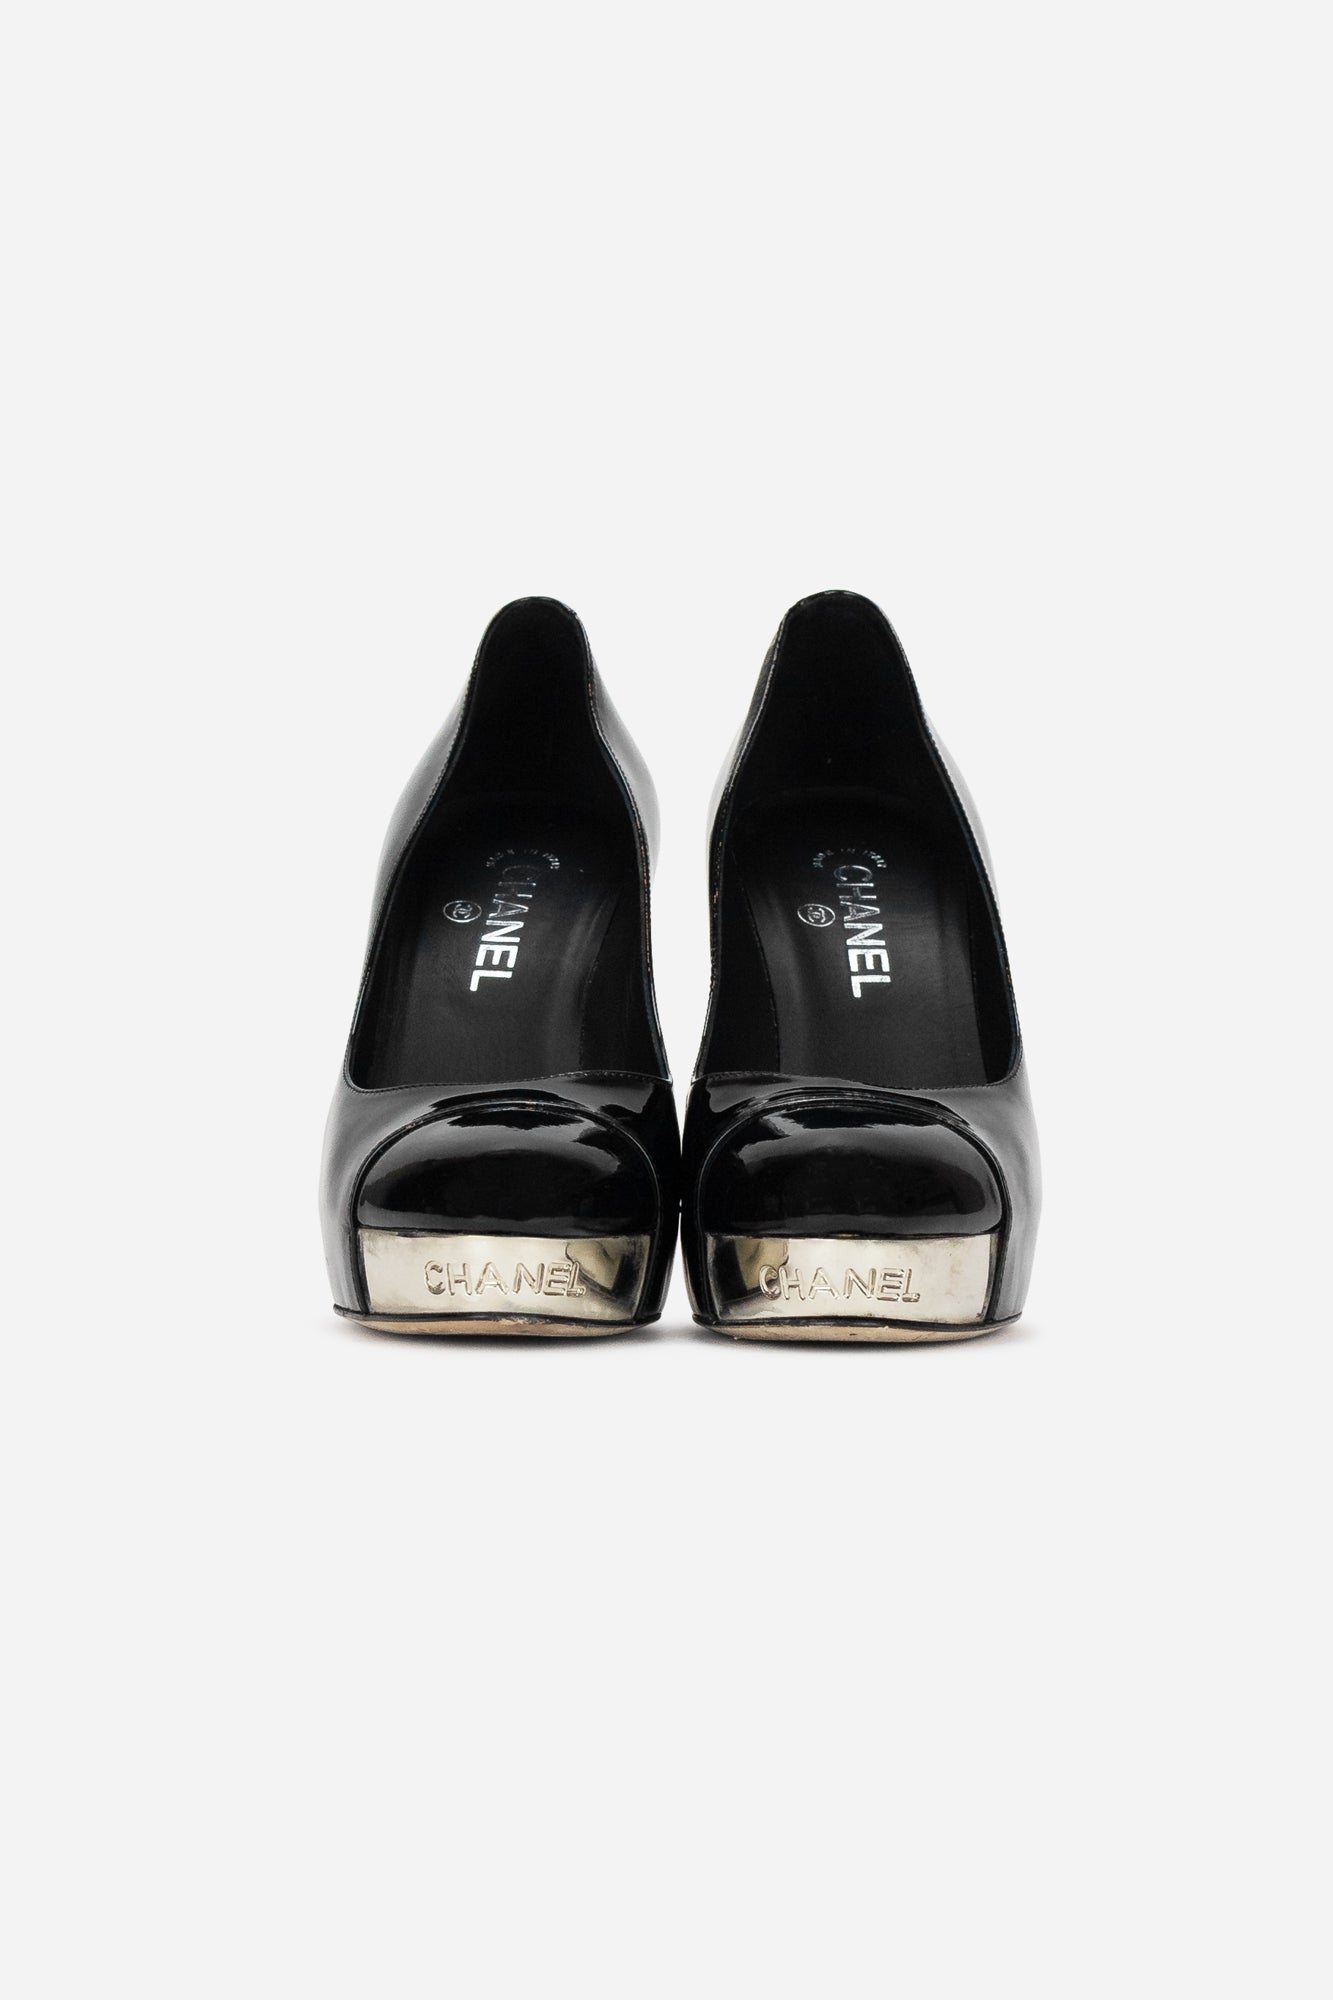 Black Patent Leather Name Plate Pumps